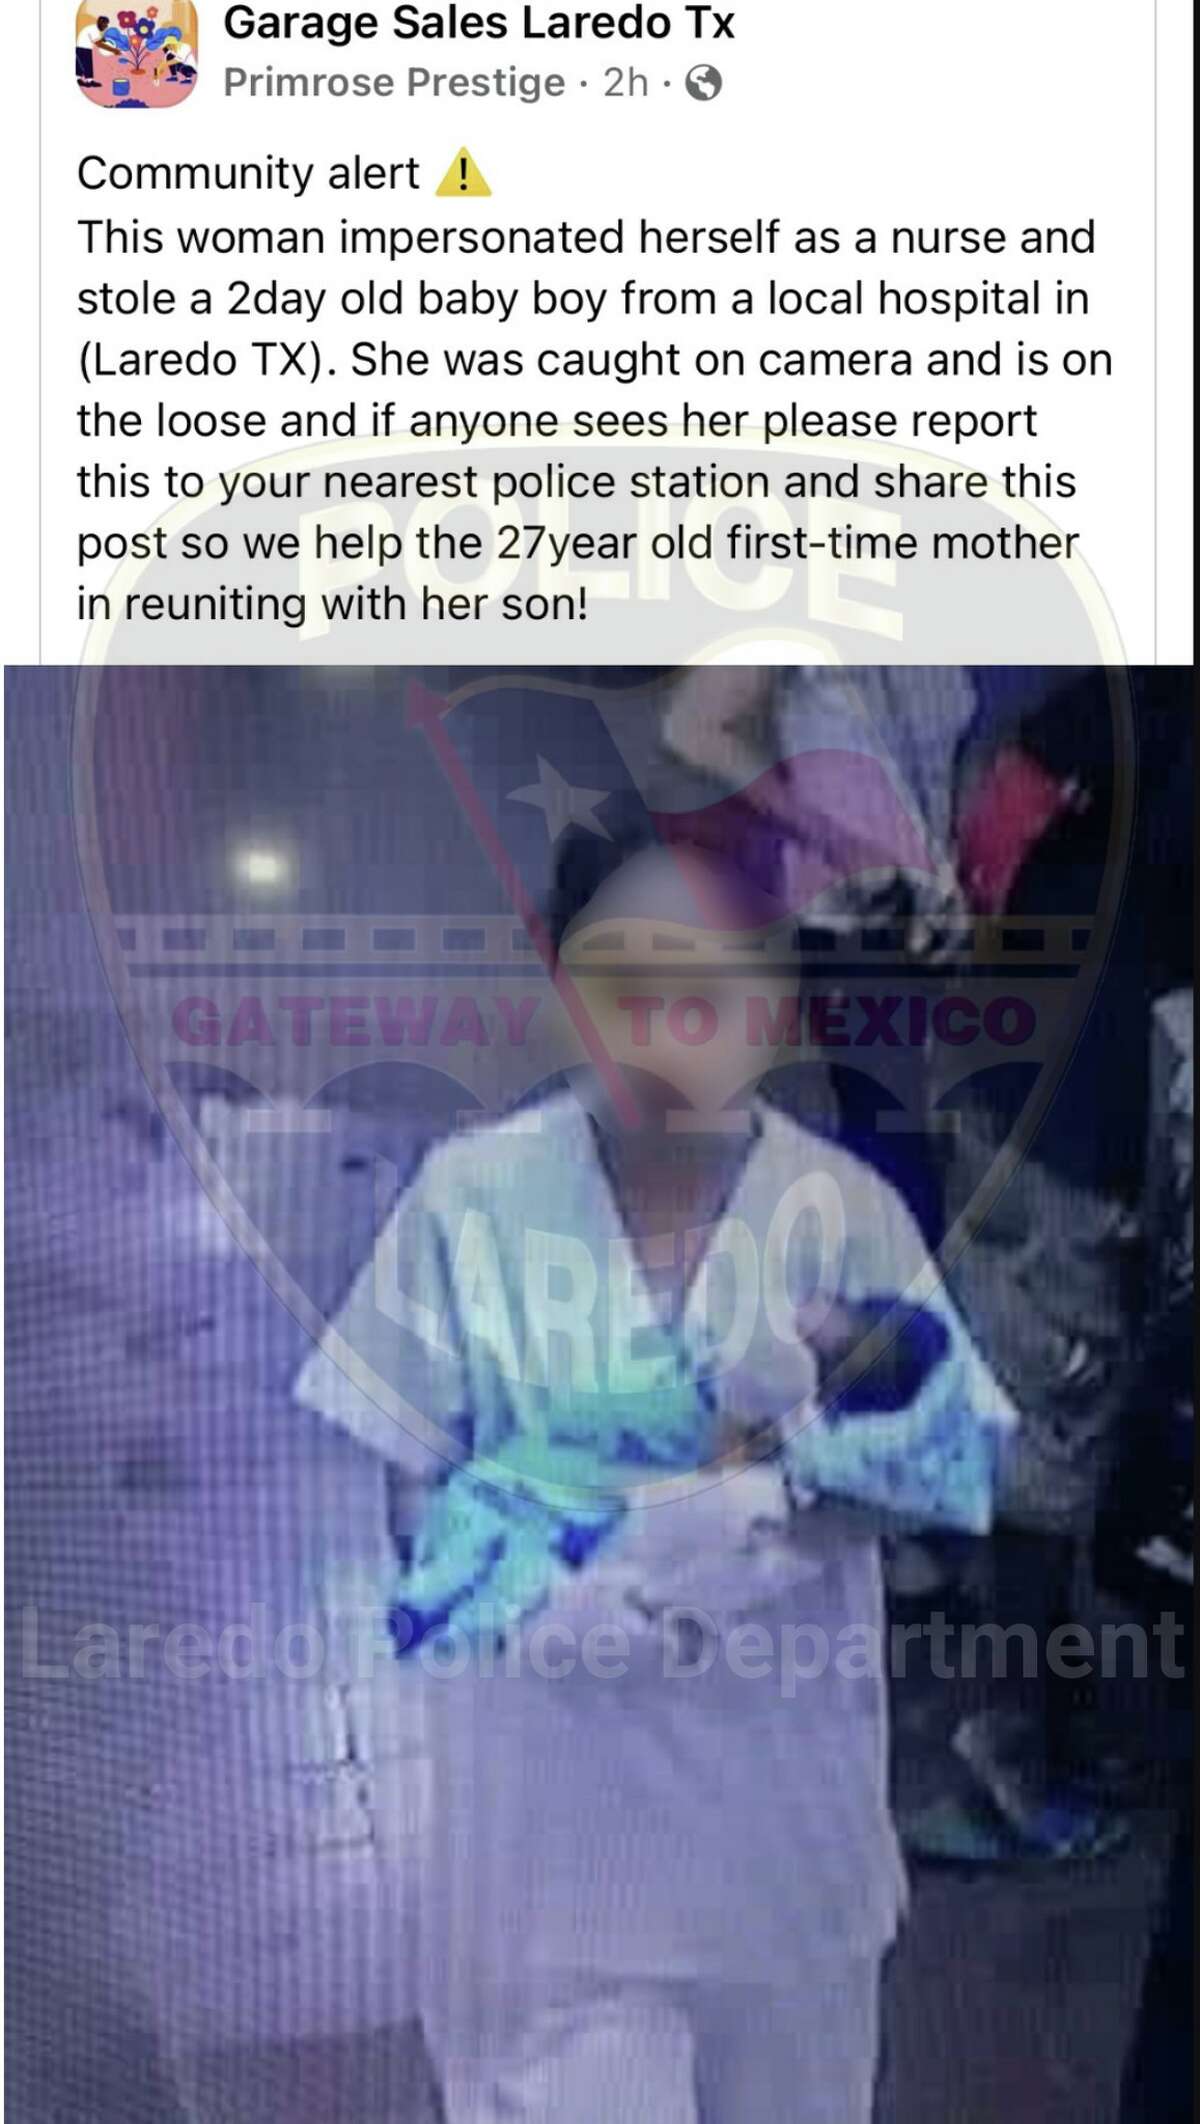 The Laredo Police Department issued a notice discrediting the above post, which claims a baby was stolen from a Laredo hospital. 